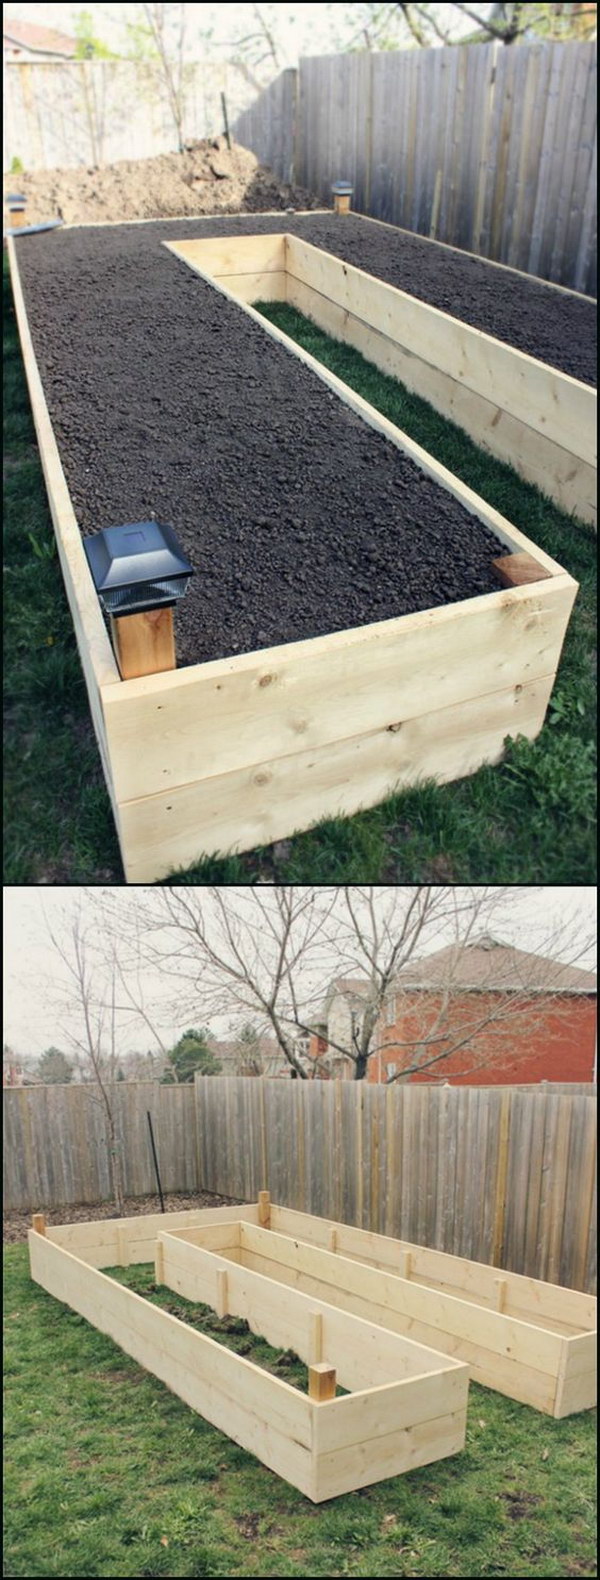 How to Make a U-Shaped Raised Garden Bed. 